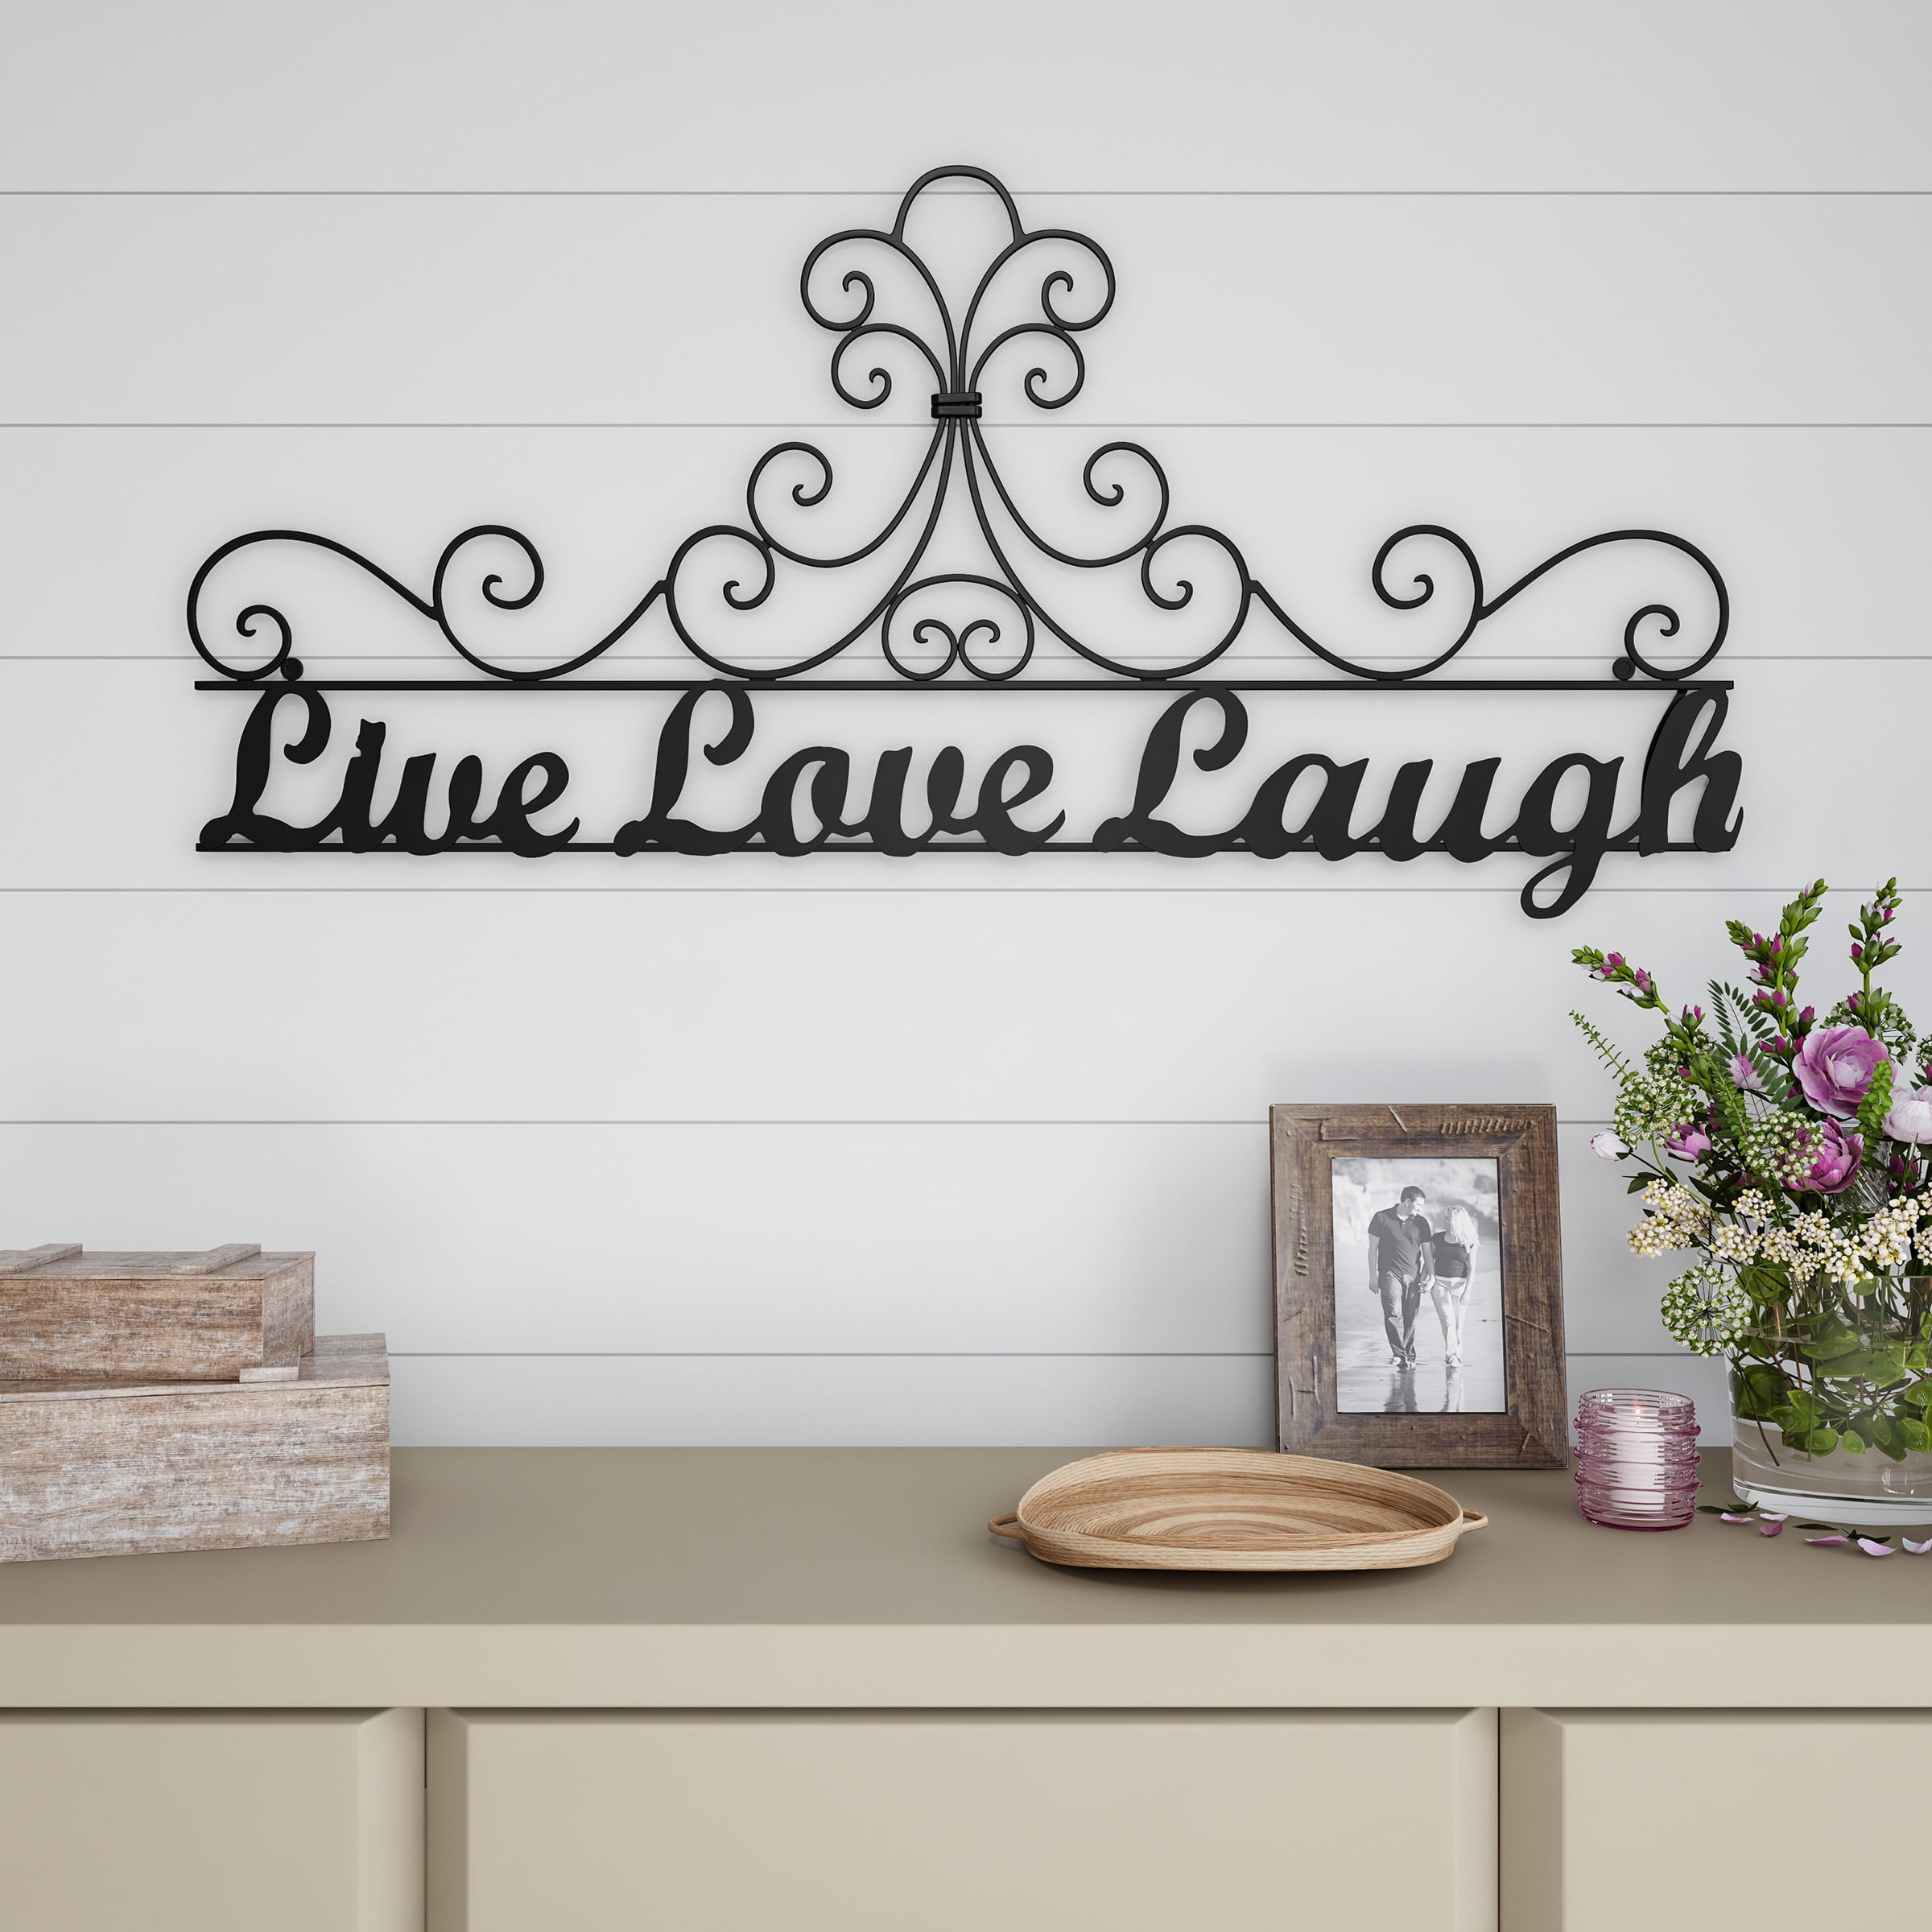 Wood Sign Home Décor Rustic Wood Sign Décor Wall Hanging Can't Adult Today sign wall décor Engraved